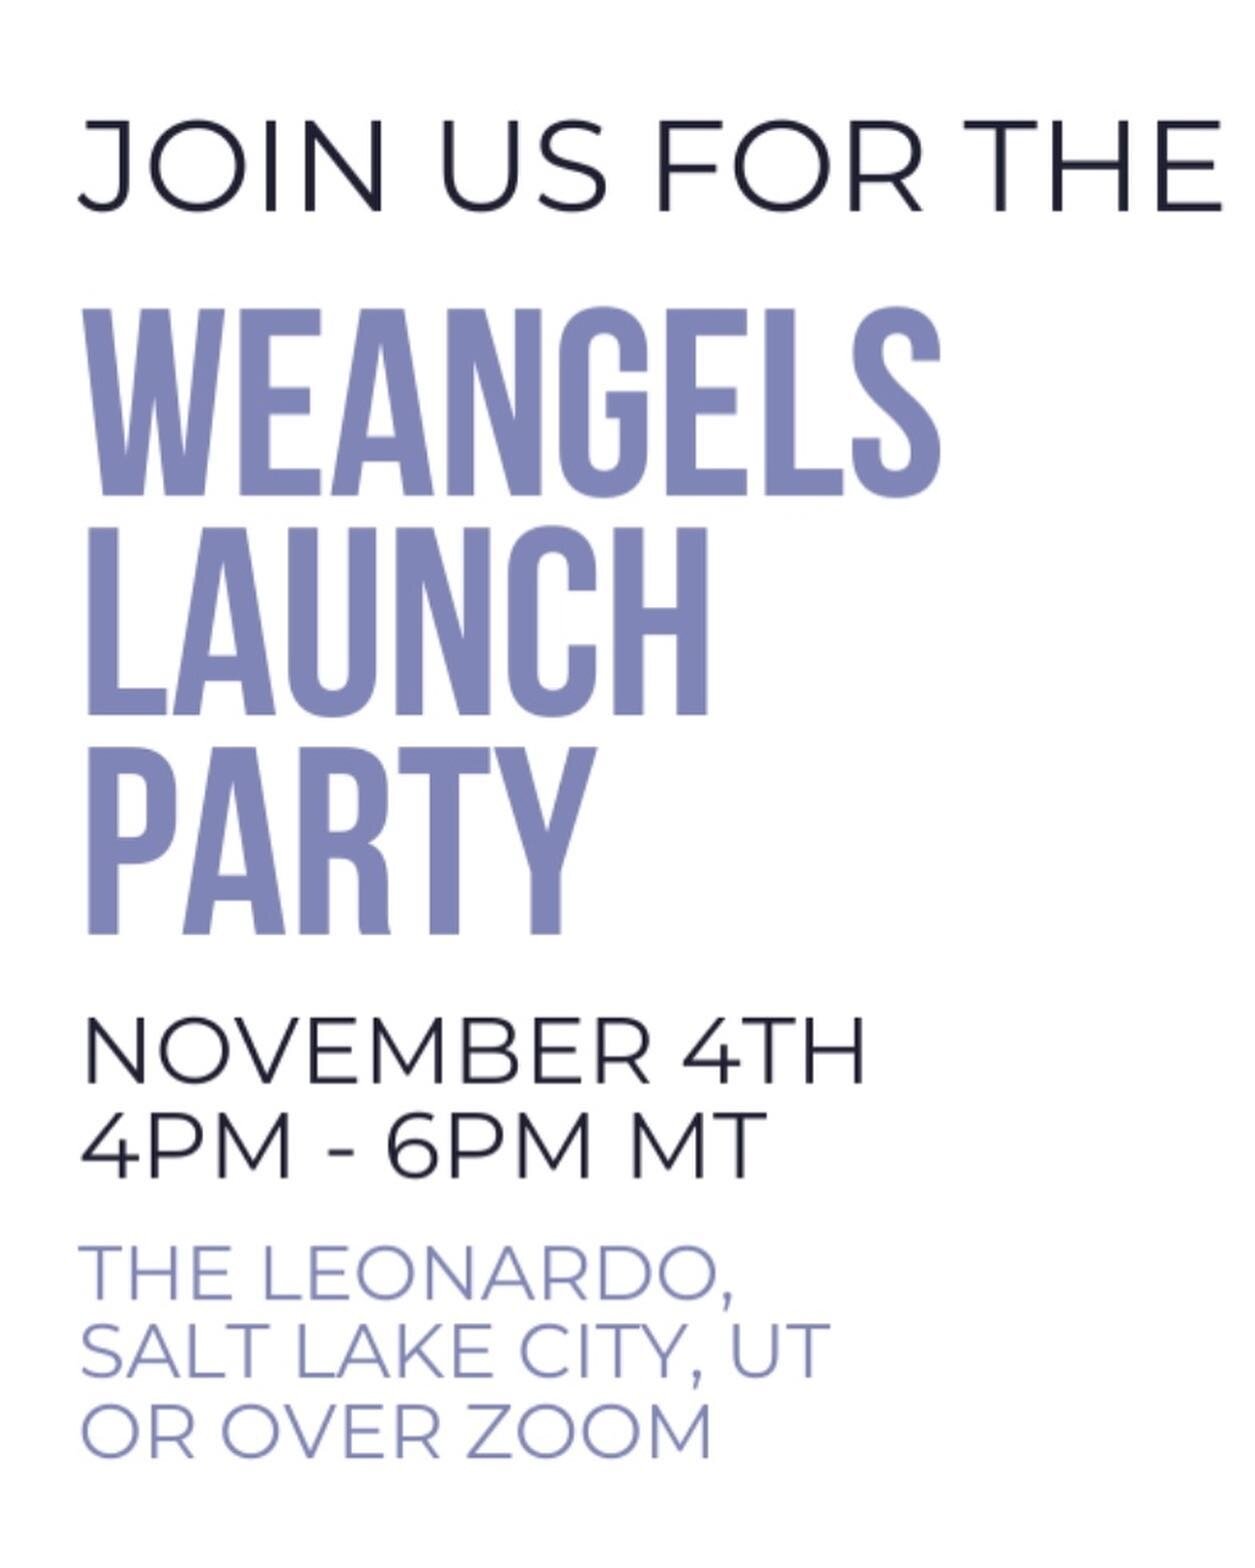 So many awesome event this week celebrating women and our financial power 💥

Join us for the launch of WeAngels, Utah's first Angel Investor group dedicated to supporting women+ founded and led businesses, and to educating and advising new investors